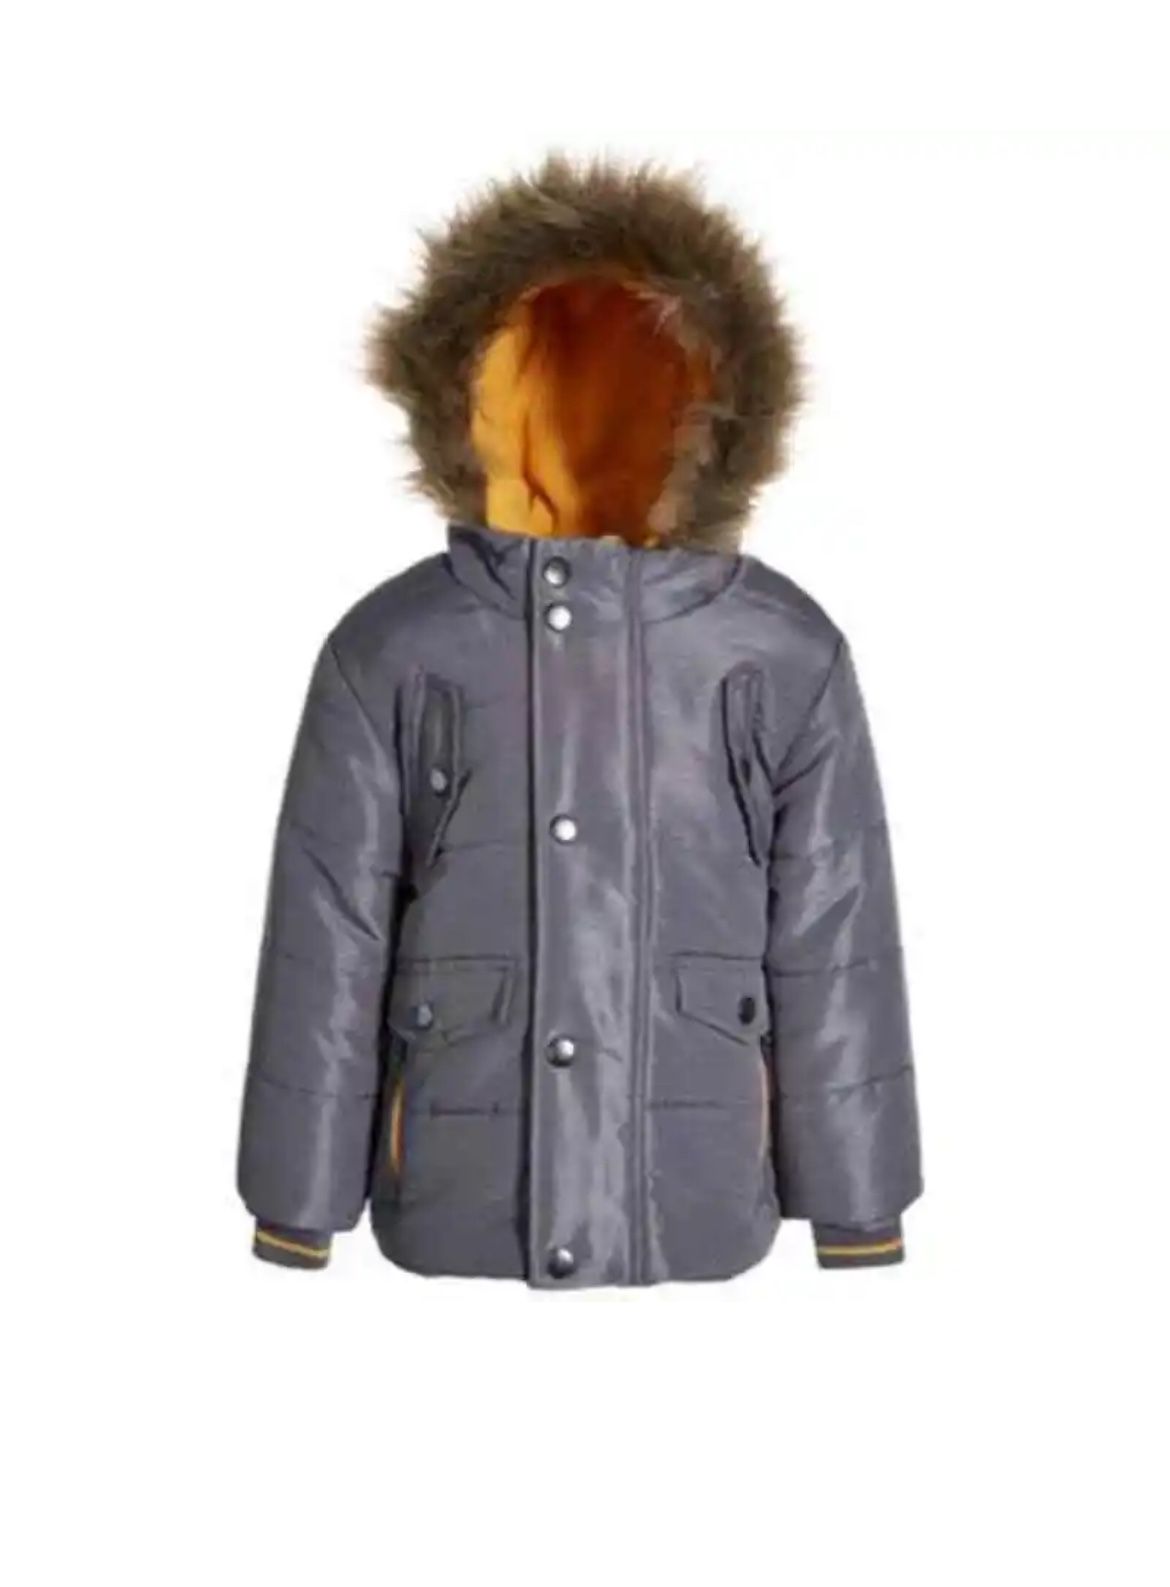 NEW S. Rothschild Baby Boys Parka Coat, Charcoal 6-9 months